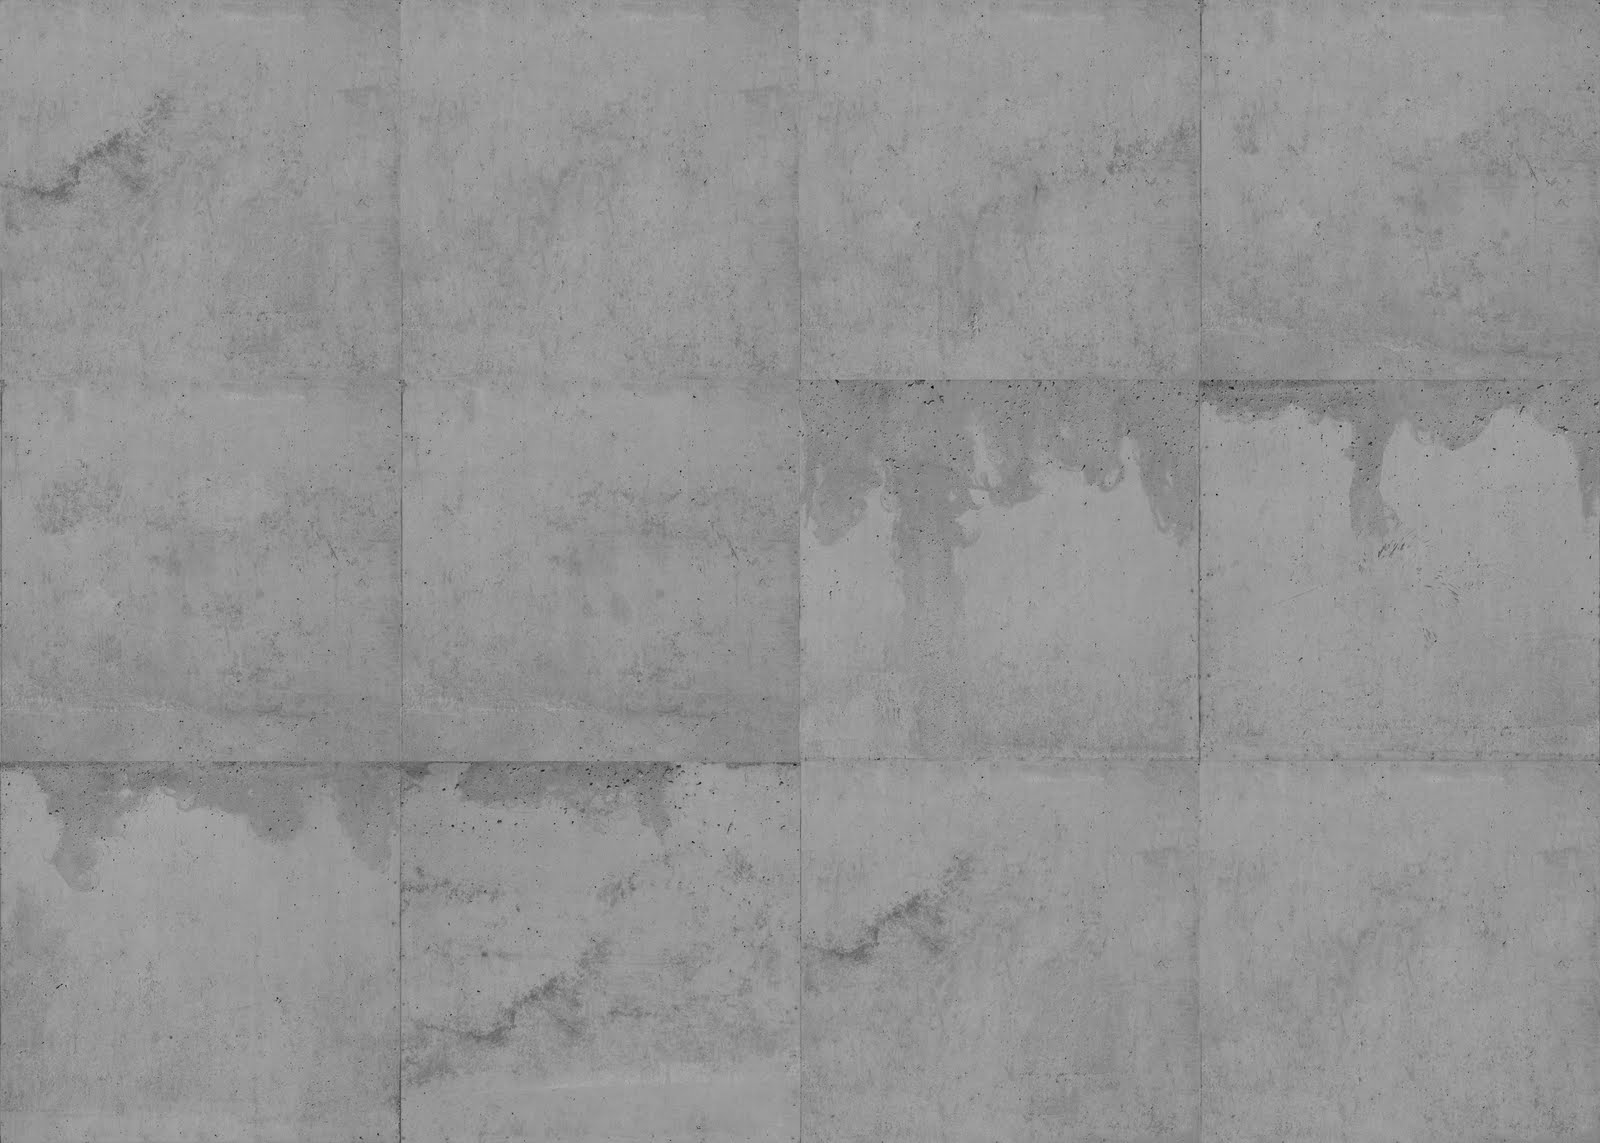 Room Wall Texture: Desember 2011